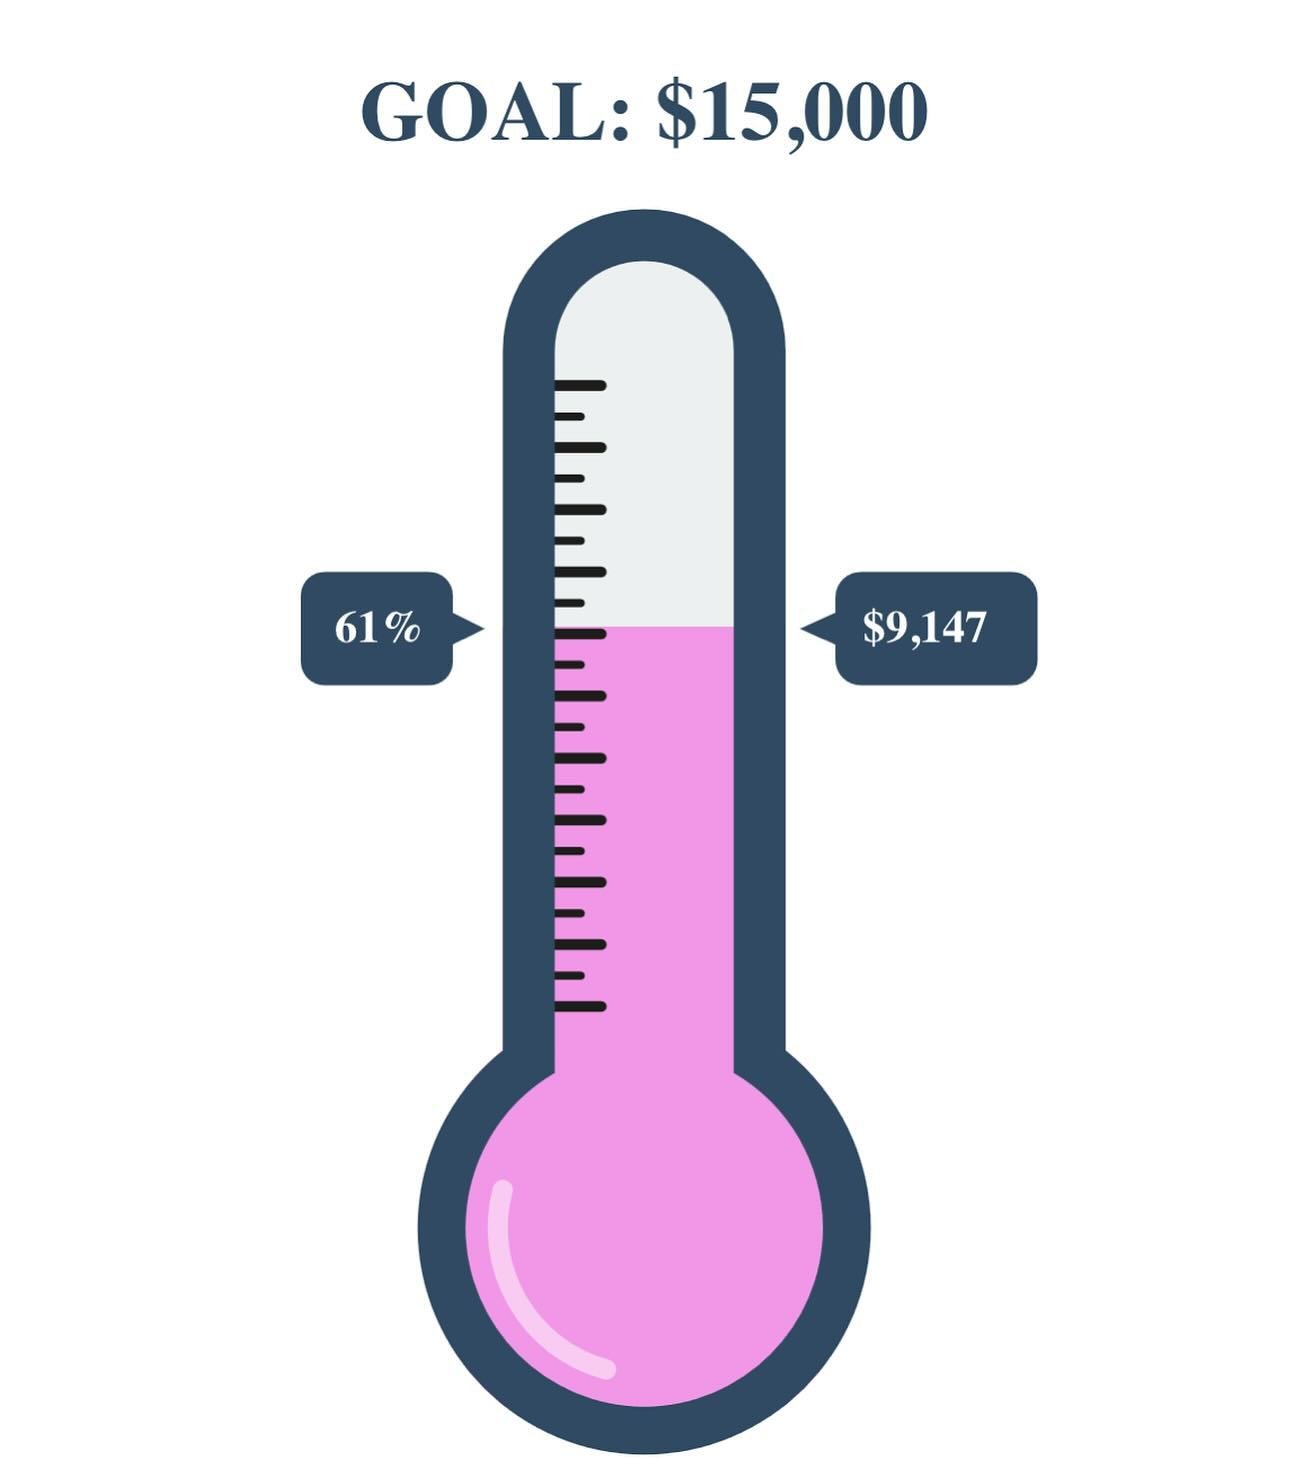 We are only $5,853 dollars away from our goal of $15k by the 15th (tomorrow). Let&rsquo;s get it done! We&rsquo;re almost there! #15kbythe15th #browngirlsdoballet #keepdancing #fundraiser